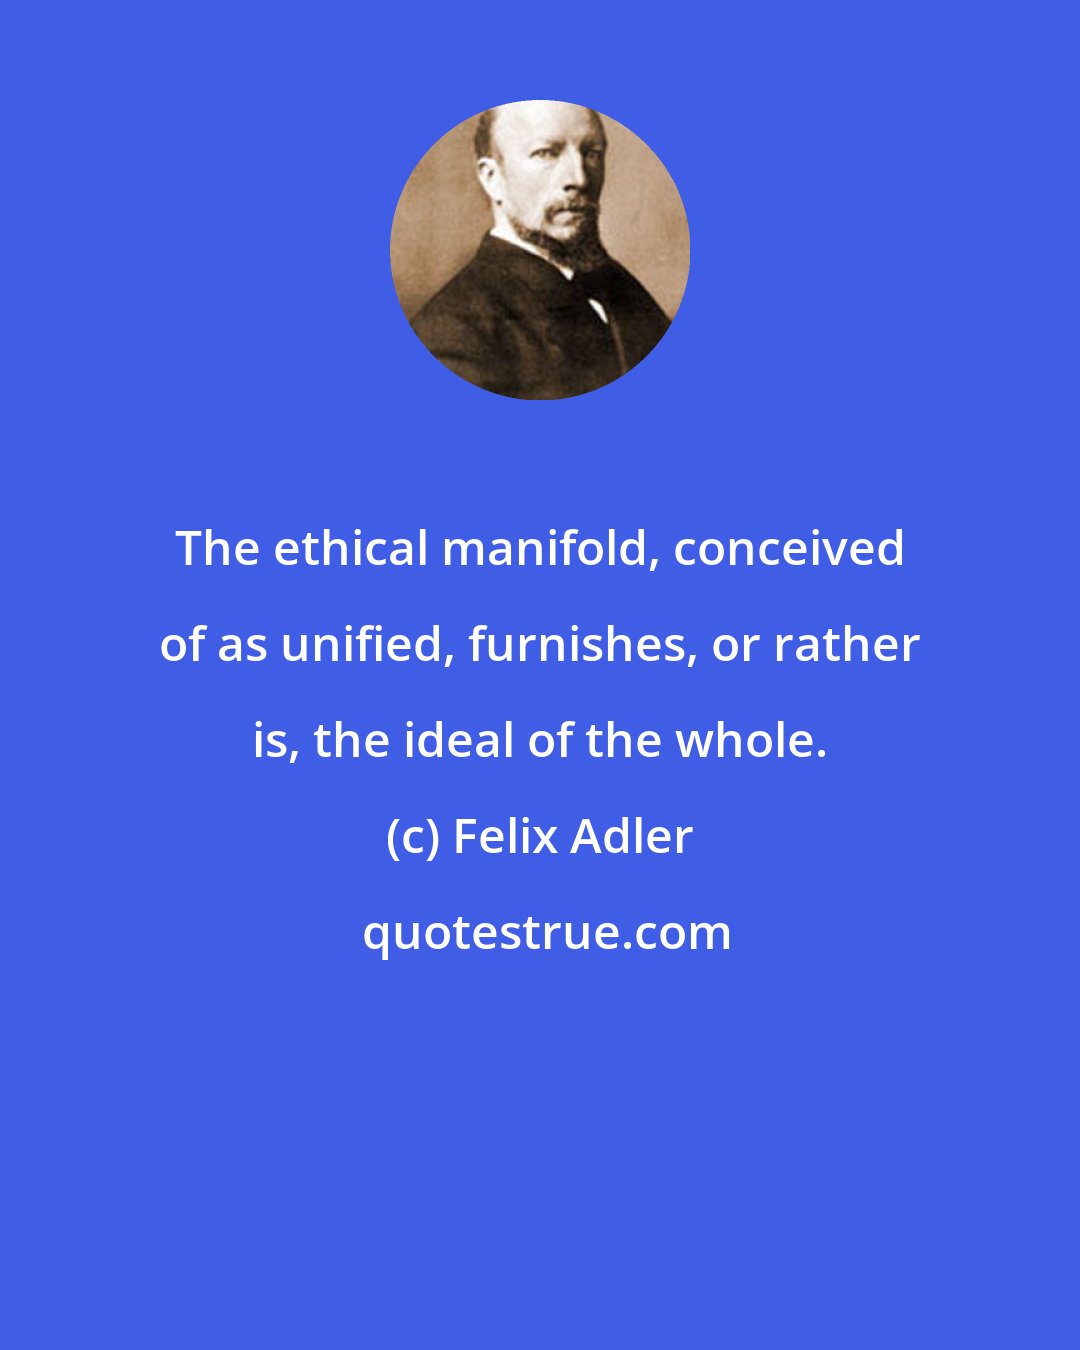 Felix Adler: The ethical manifold, conceived of as unified, furnishes, or rather is, the ideal of the whole.